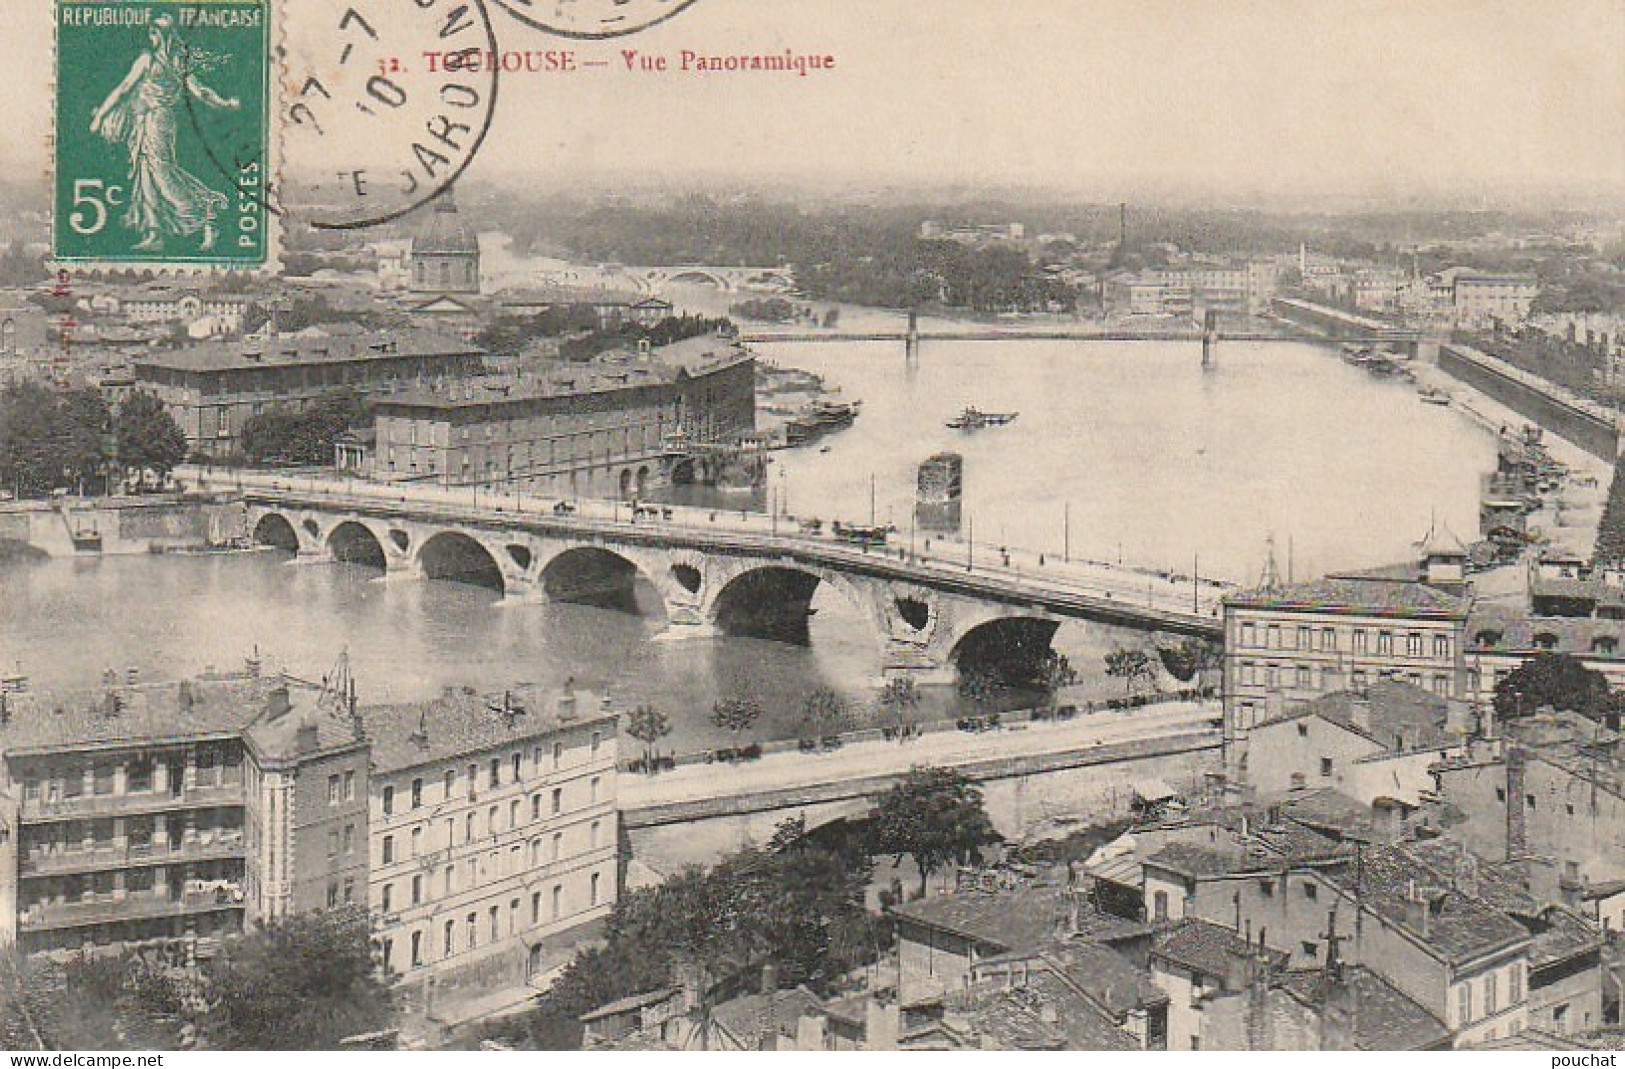 ZY 45-(31) TOULOUSE - VUE PANORAMIQUE - 2 SCANS - Toulouse